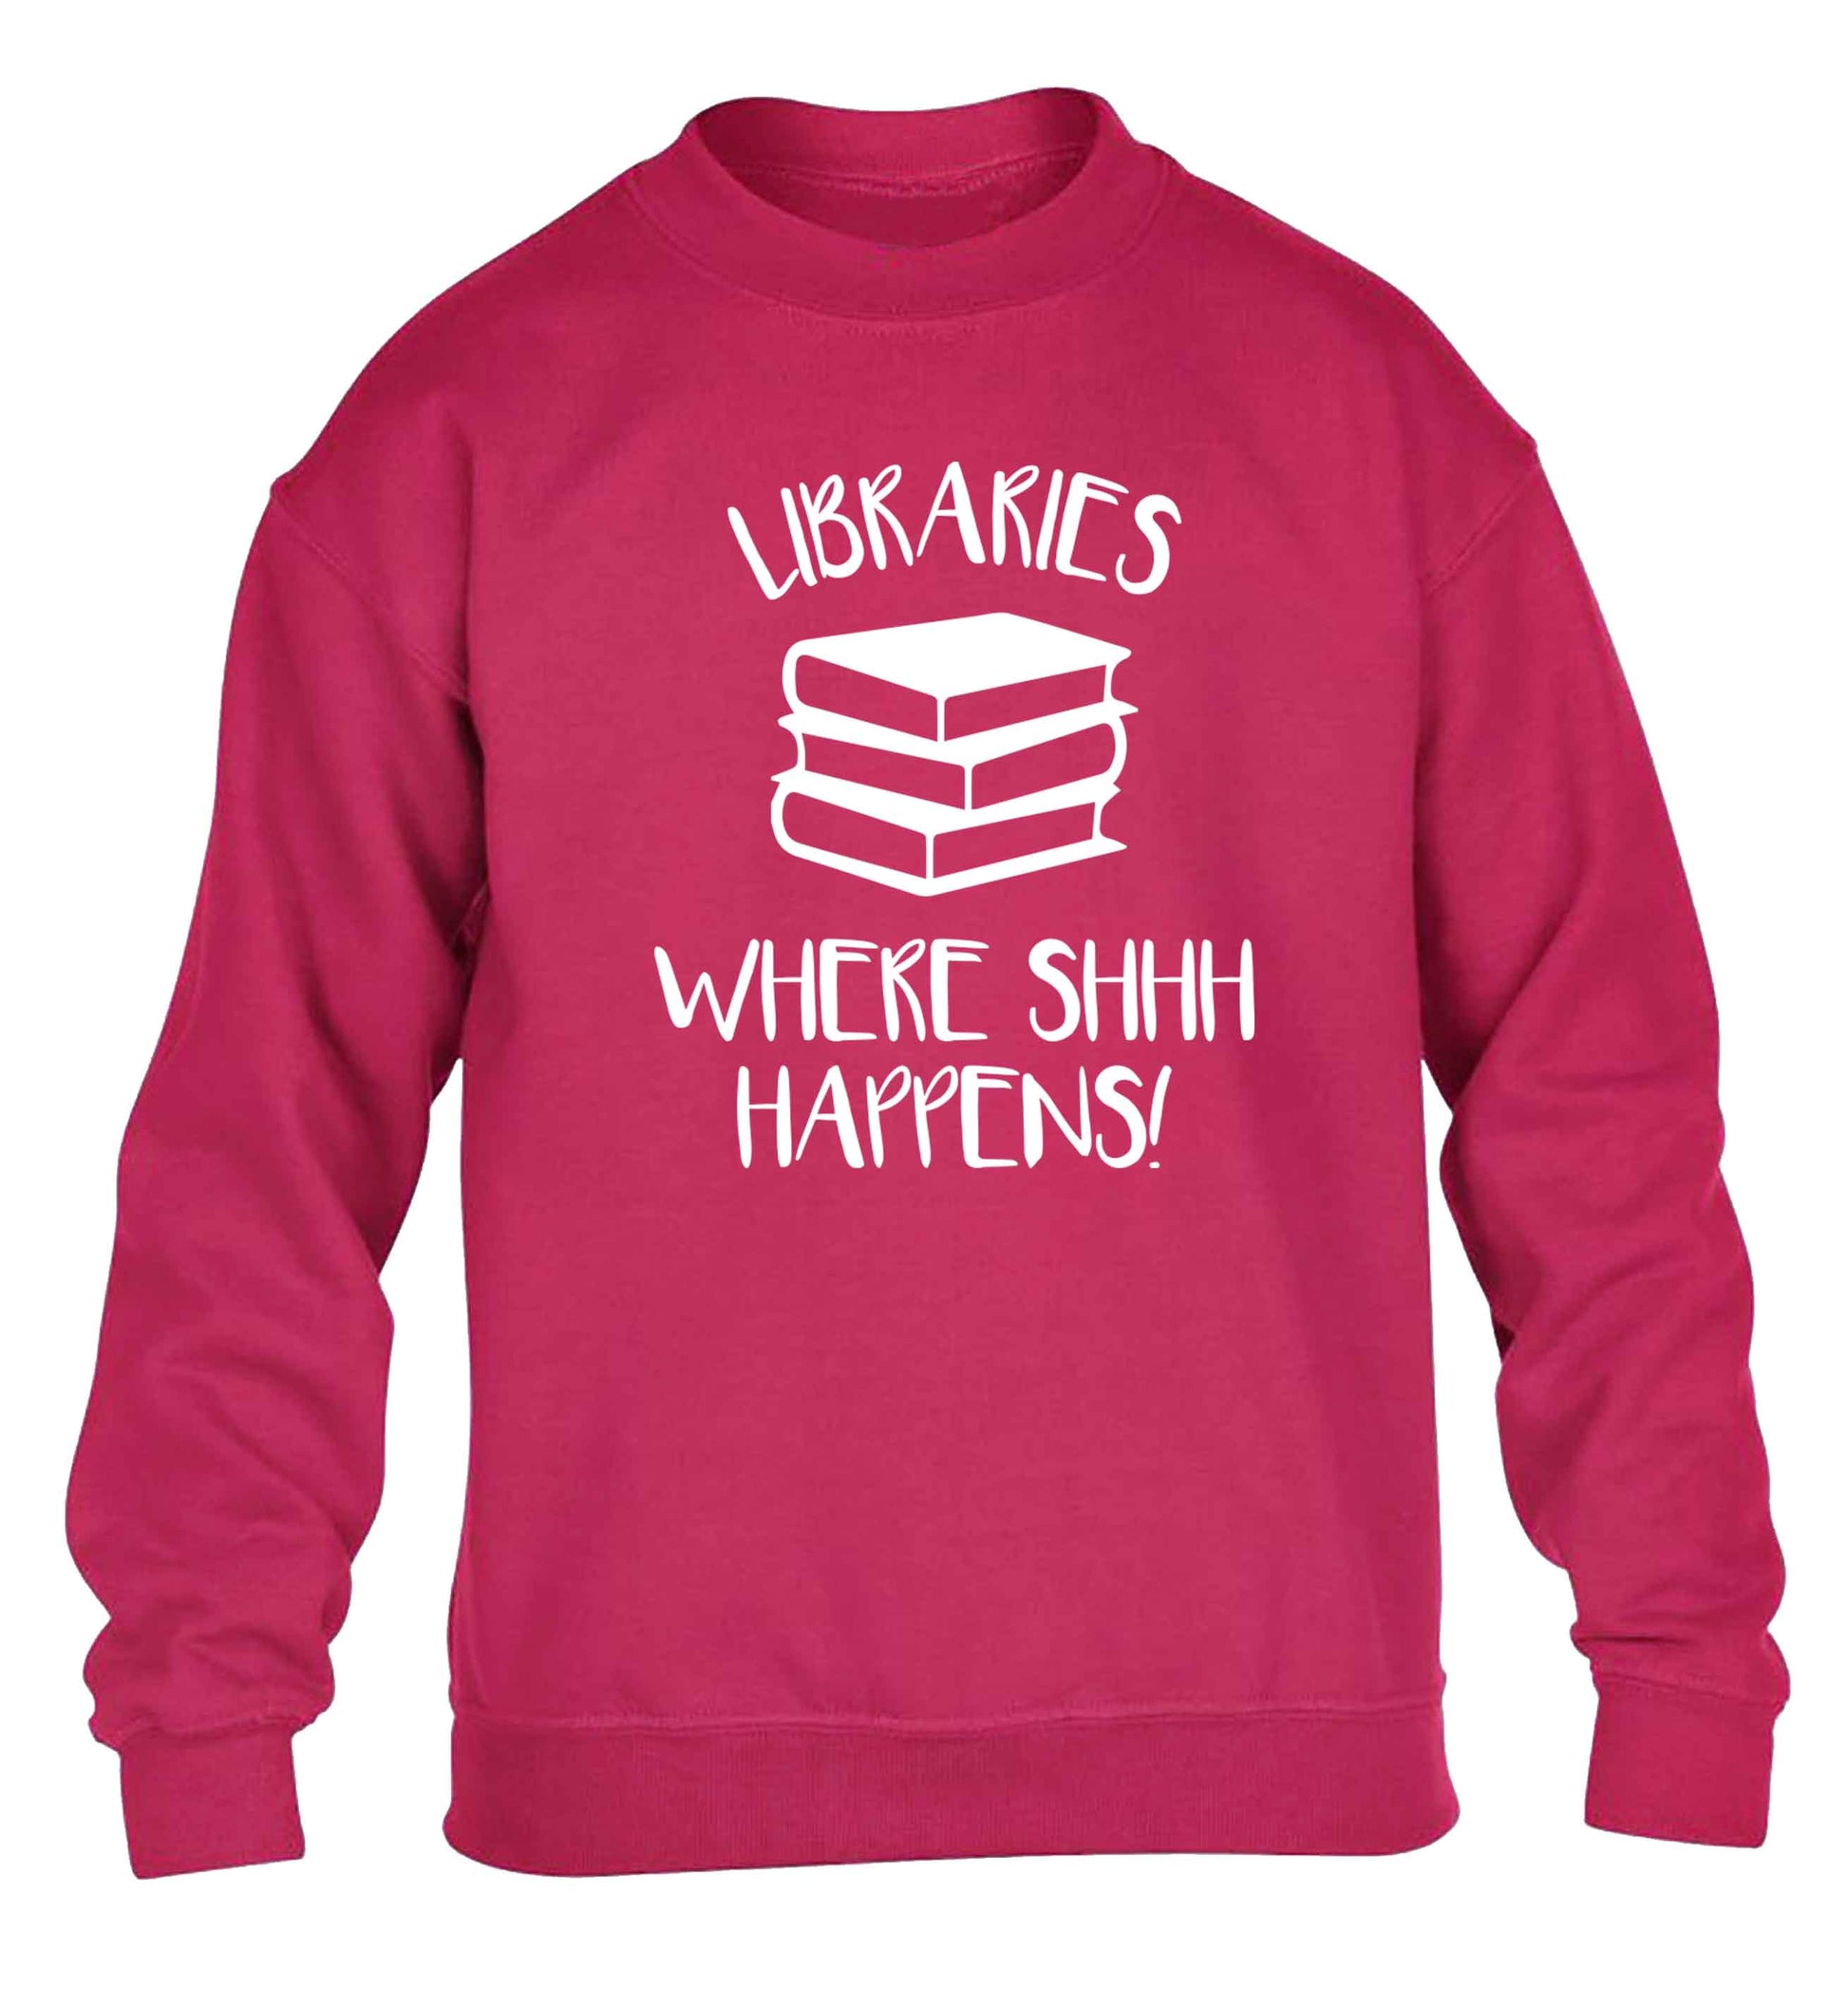 Libraries where shh happens! children's pink sweater 12-13 Years